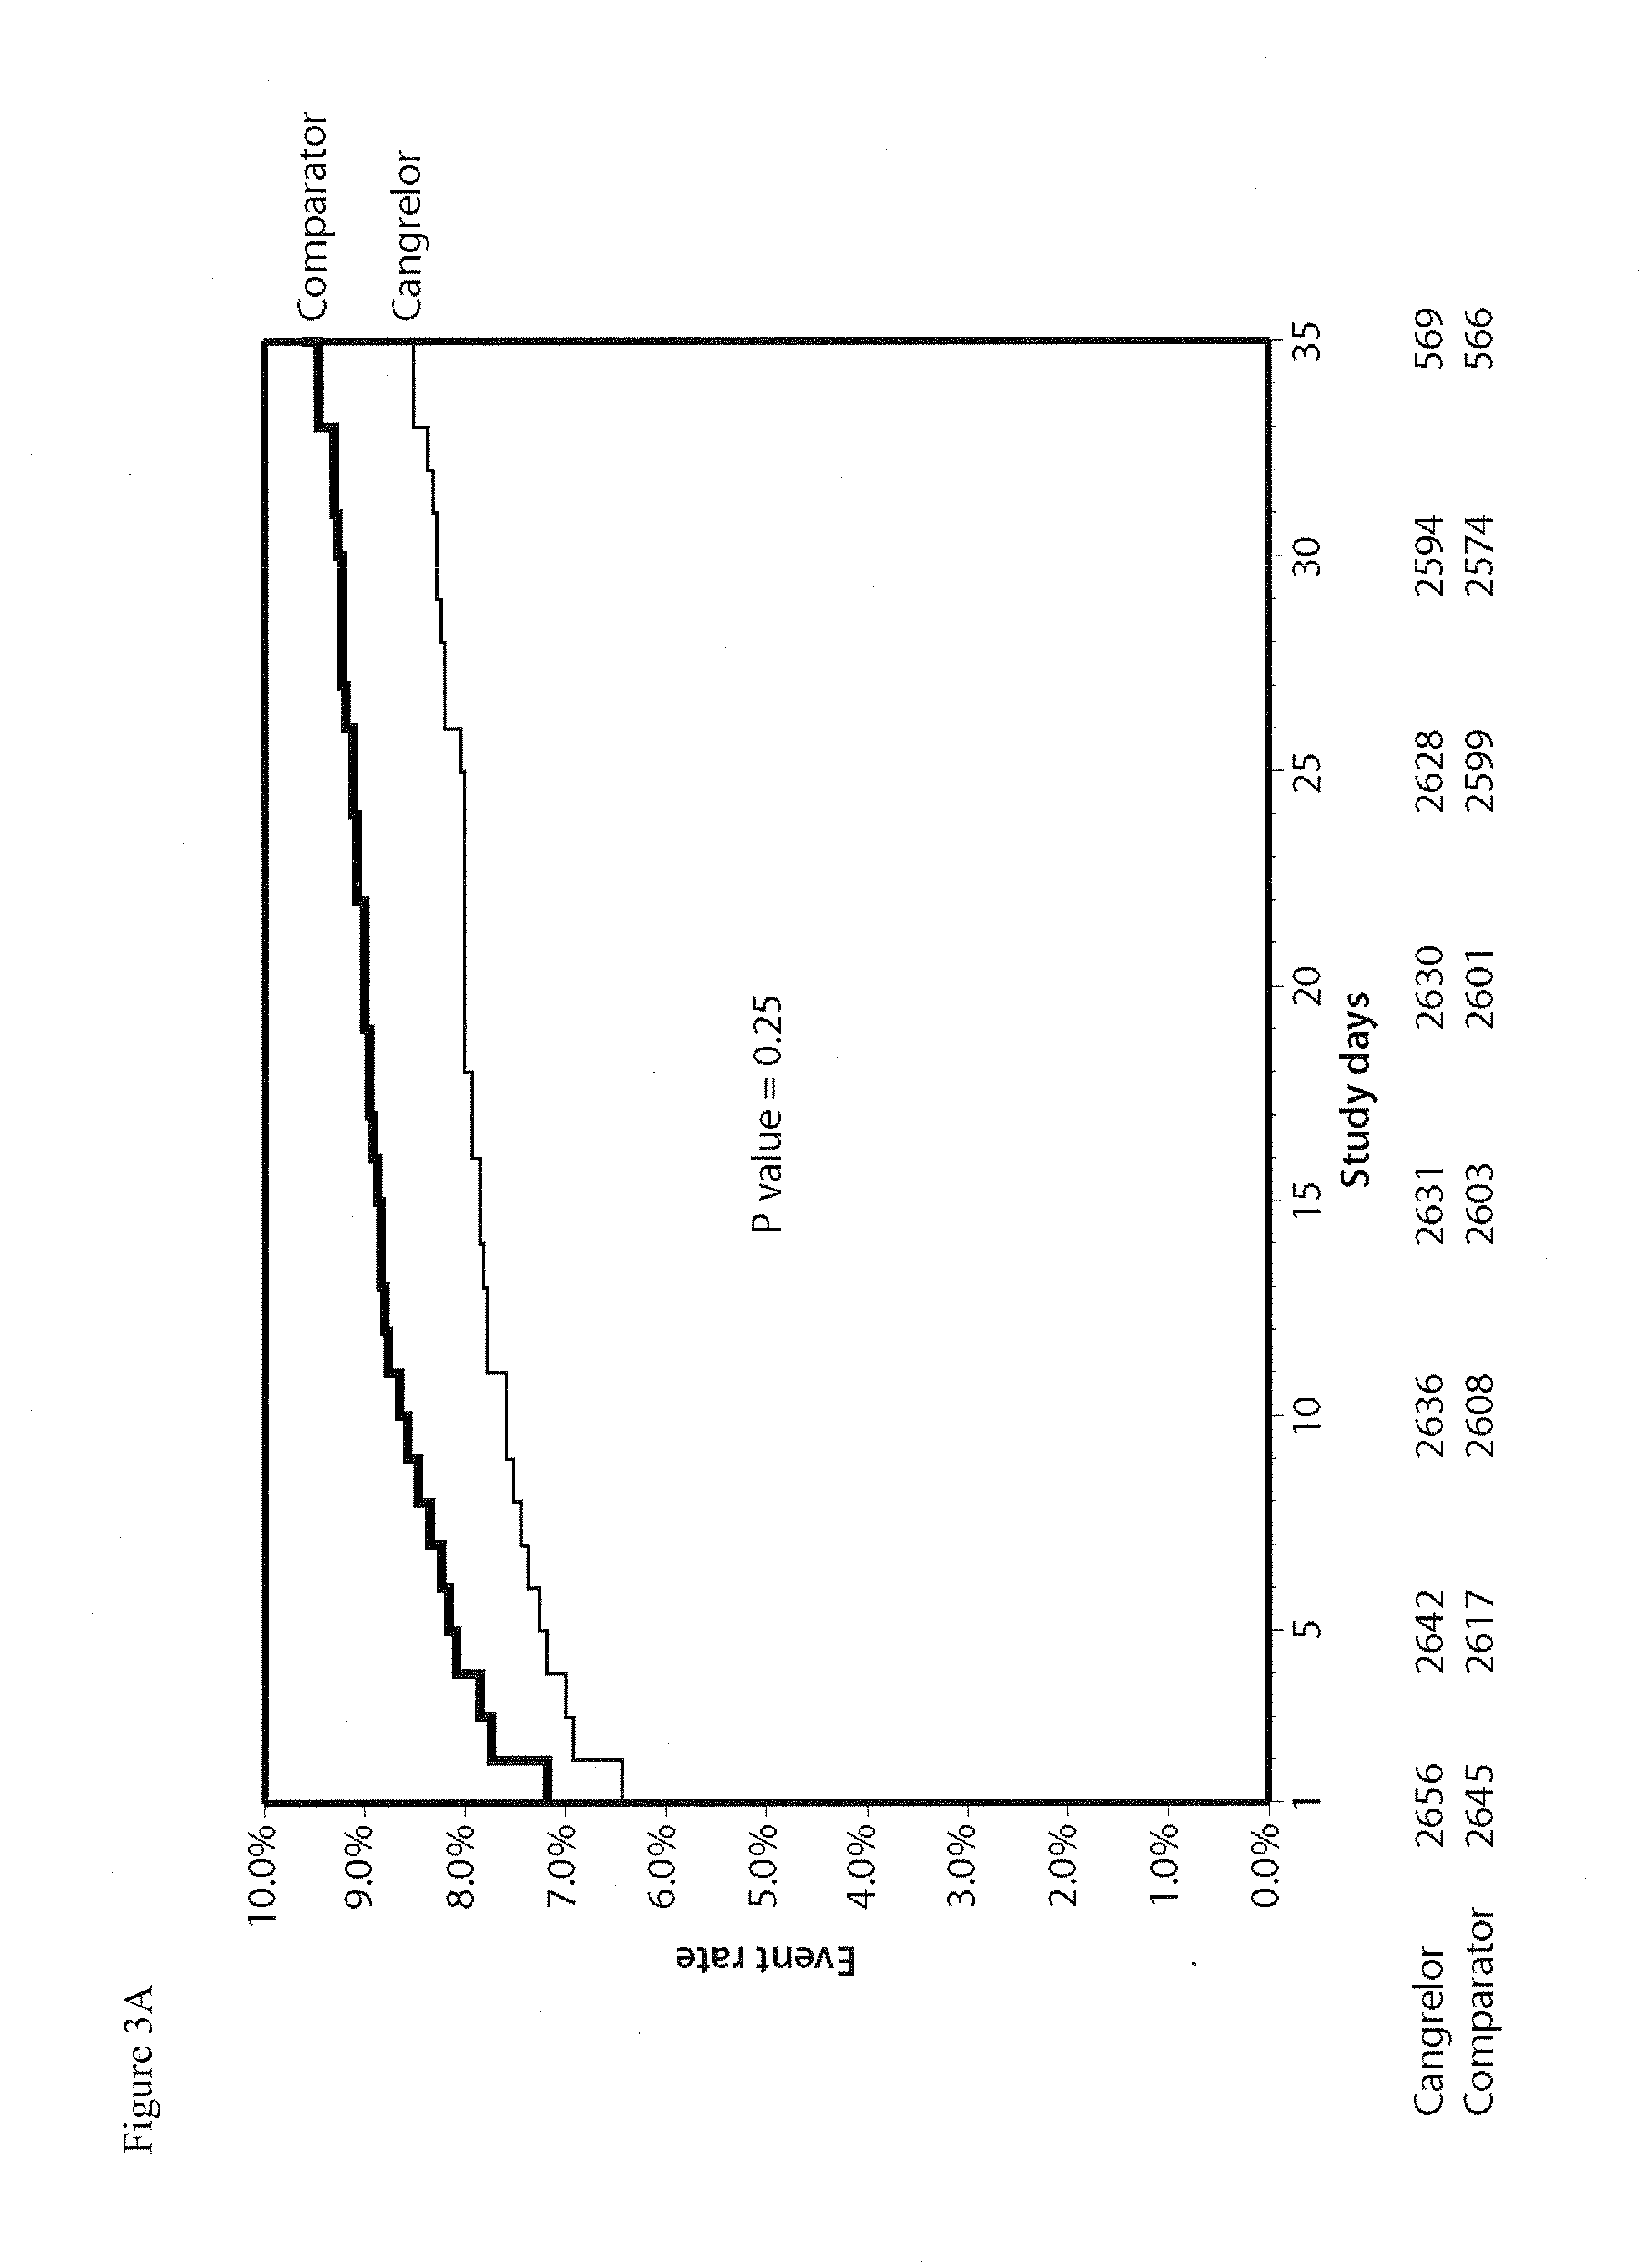 Methods of Treating, Reducing the Incidence of, and/or Preventing Ischemic Events